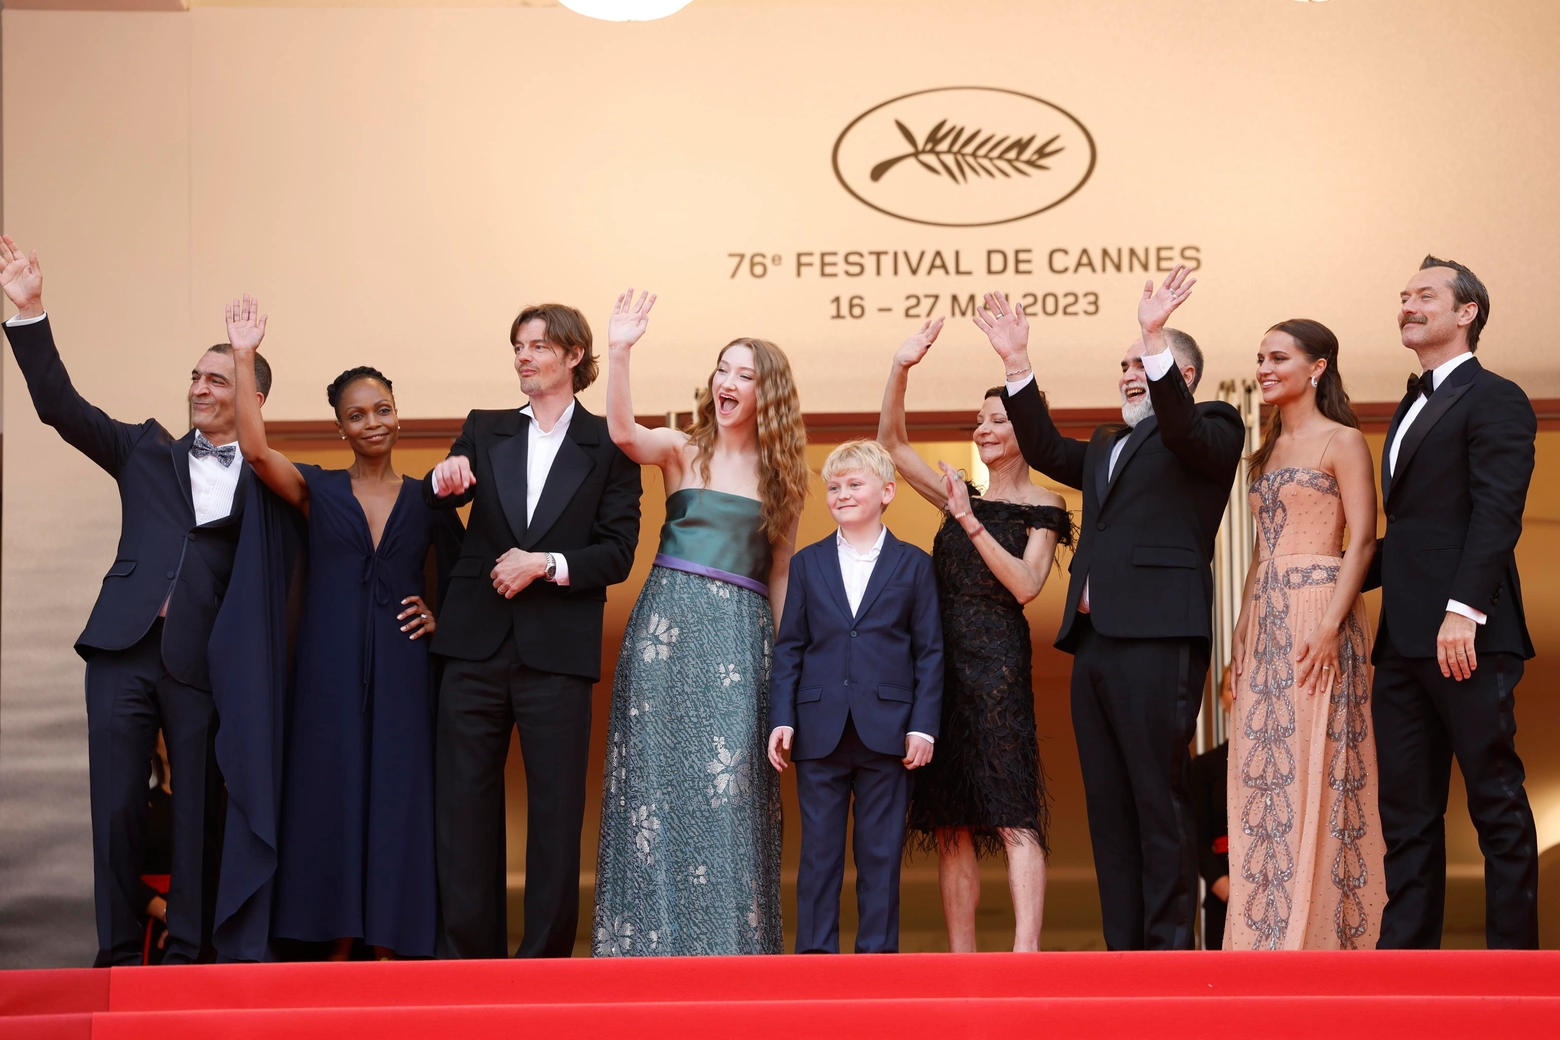 epa10644363 (L-R) Amr Waked, Mina Andala, Sam Riley, Junia Rees, a guest, producer Gabrielle Tana, director Karim Ainouz, Alicia Vikander, and Jude Law arrive for the screening of 'Le Jeu de la reine' (Firebrand) during the 76th annual Cannes Film Festival, in Cannes, France, 21 May 2023. The movie is presented in the Official Competition of the festival which runs from 16 to 27 May.  EPA/SEBASTIEN NOGIER